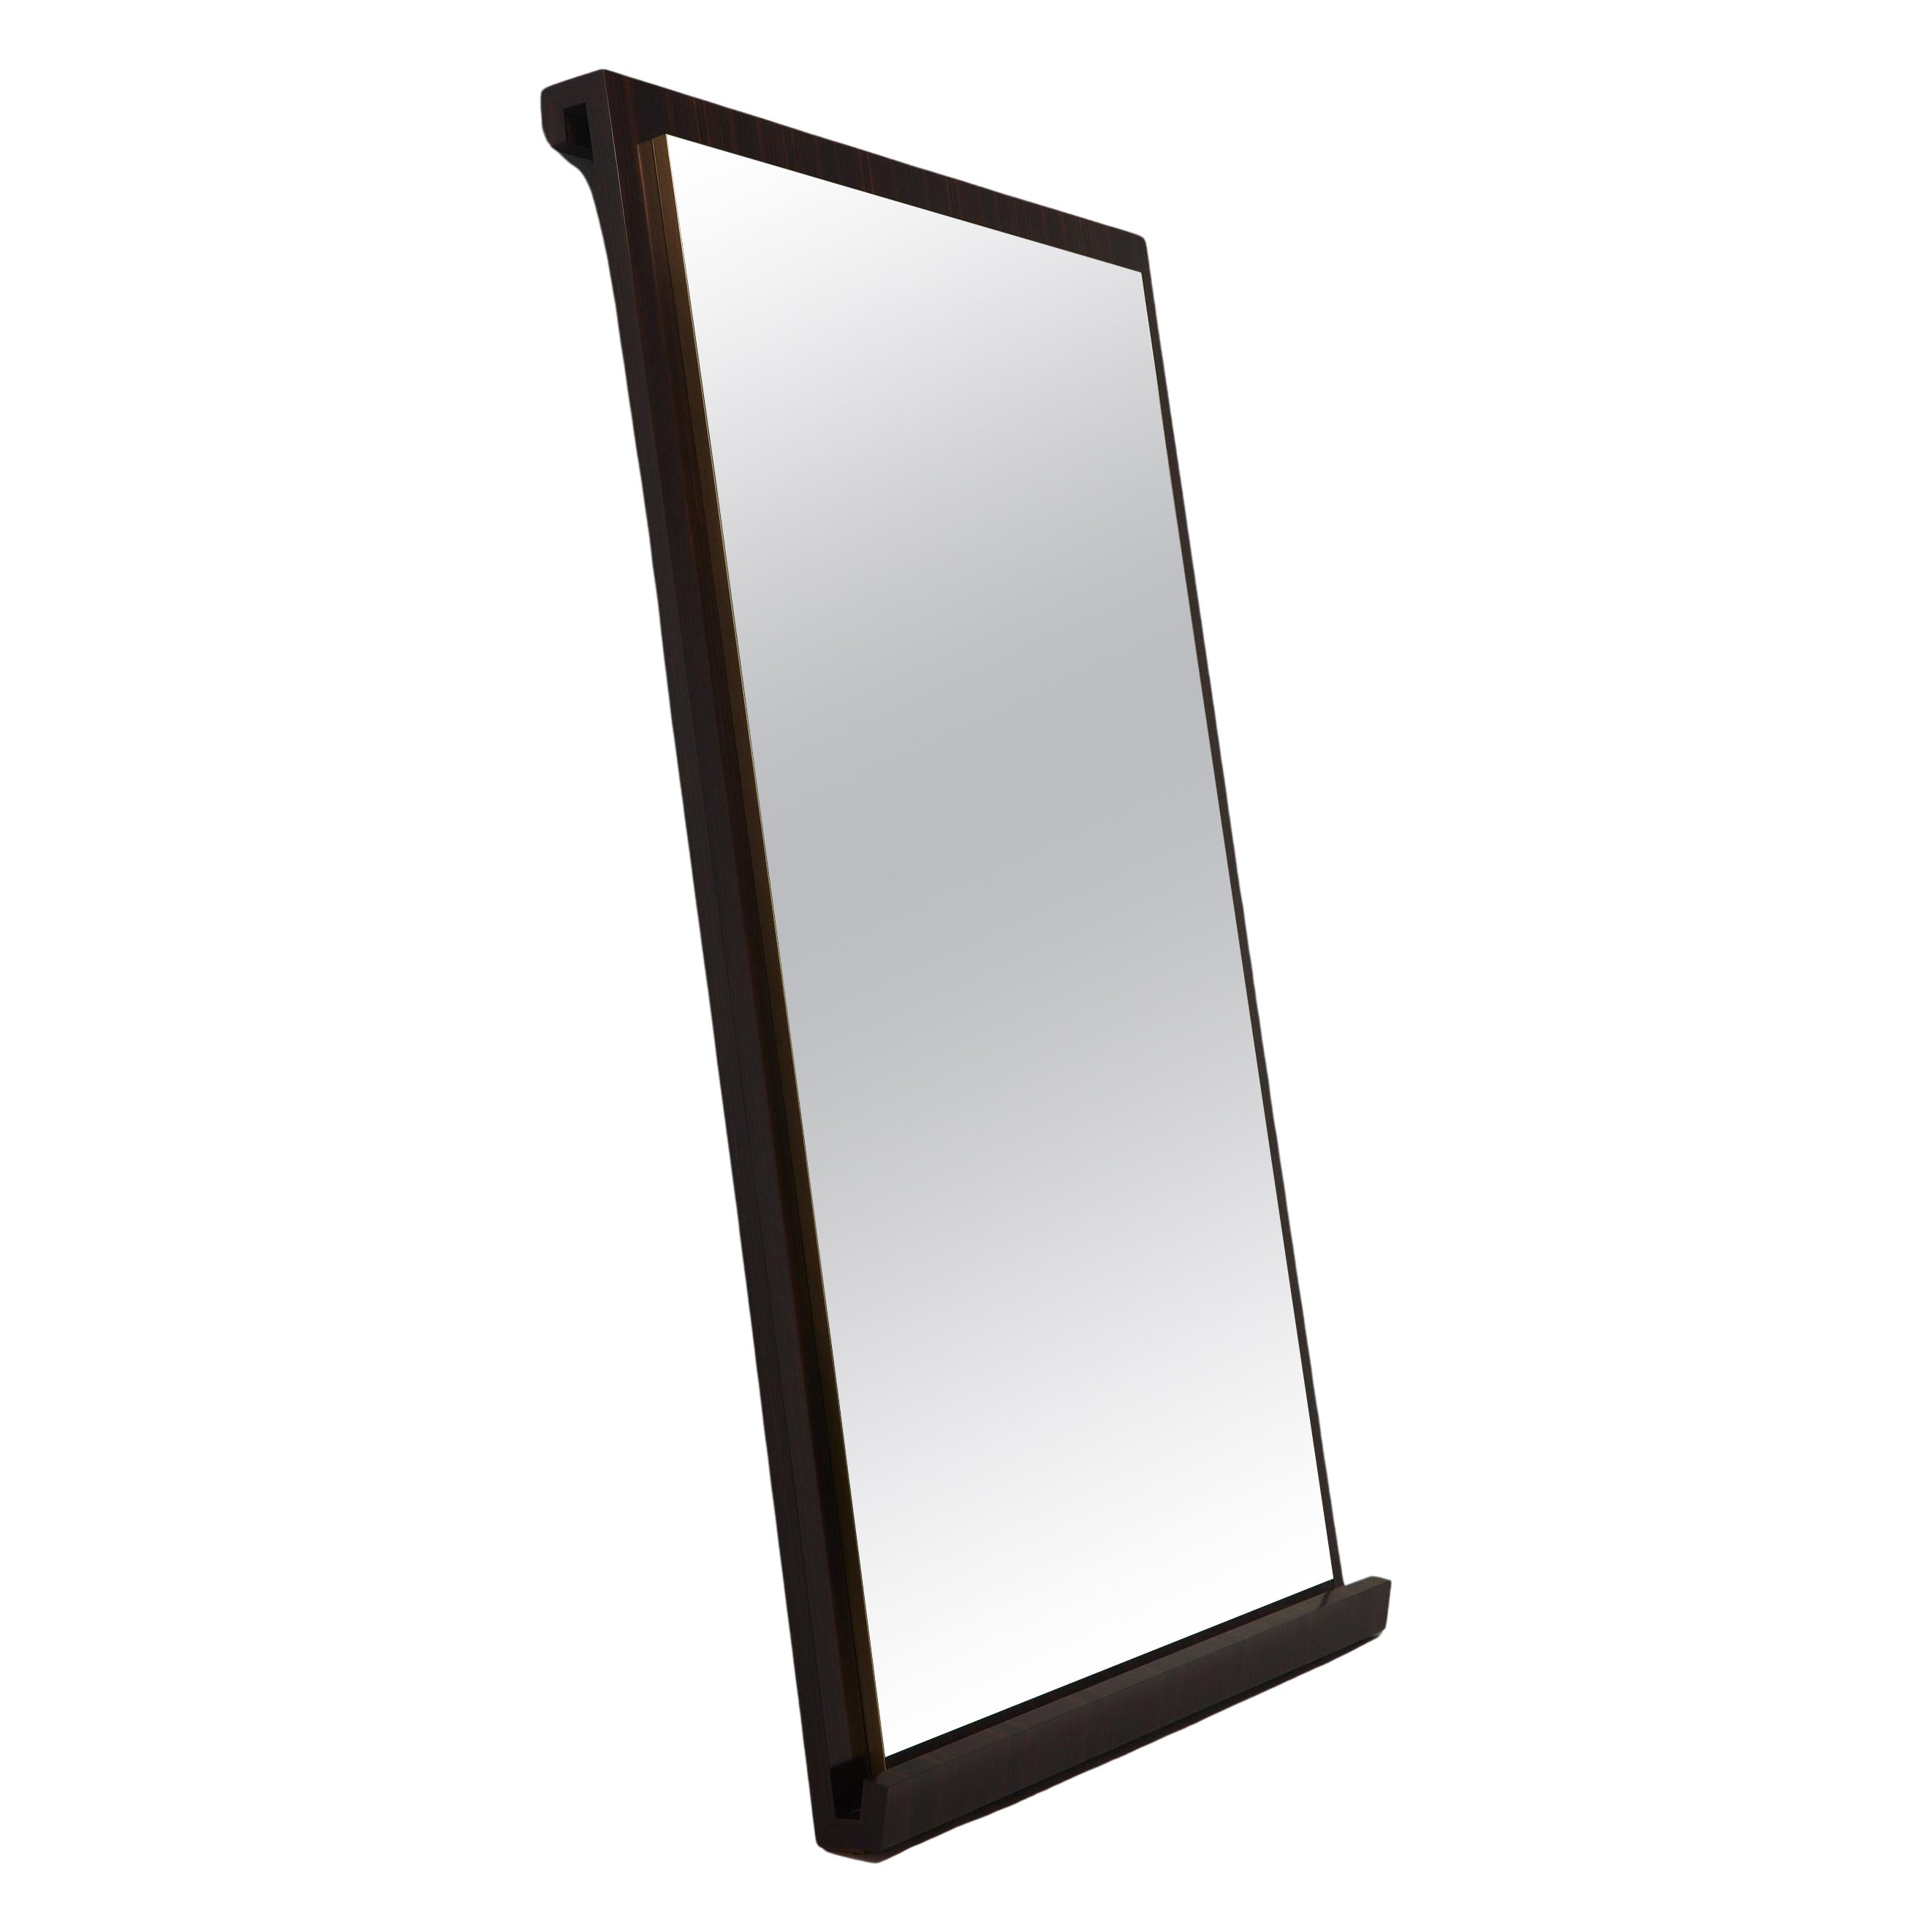 Continuous Mirror - Hand applied wood veneer & brass